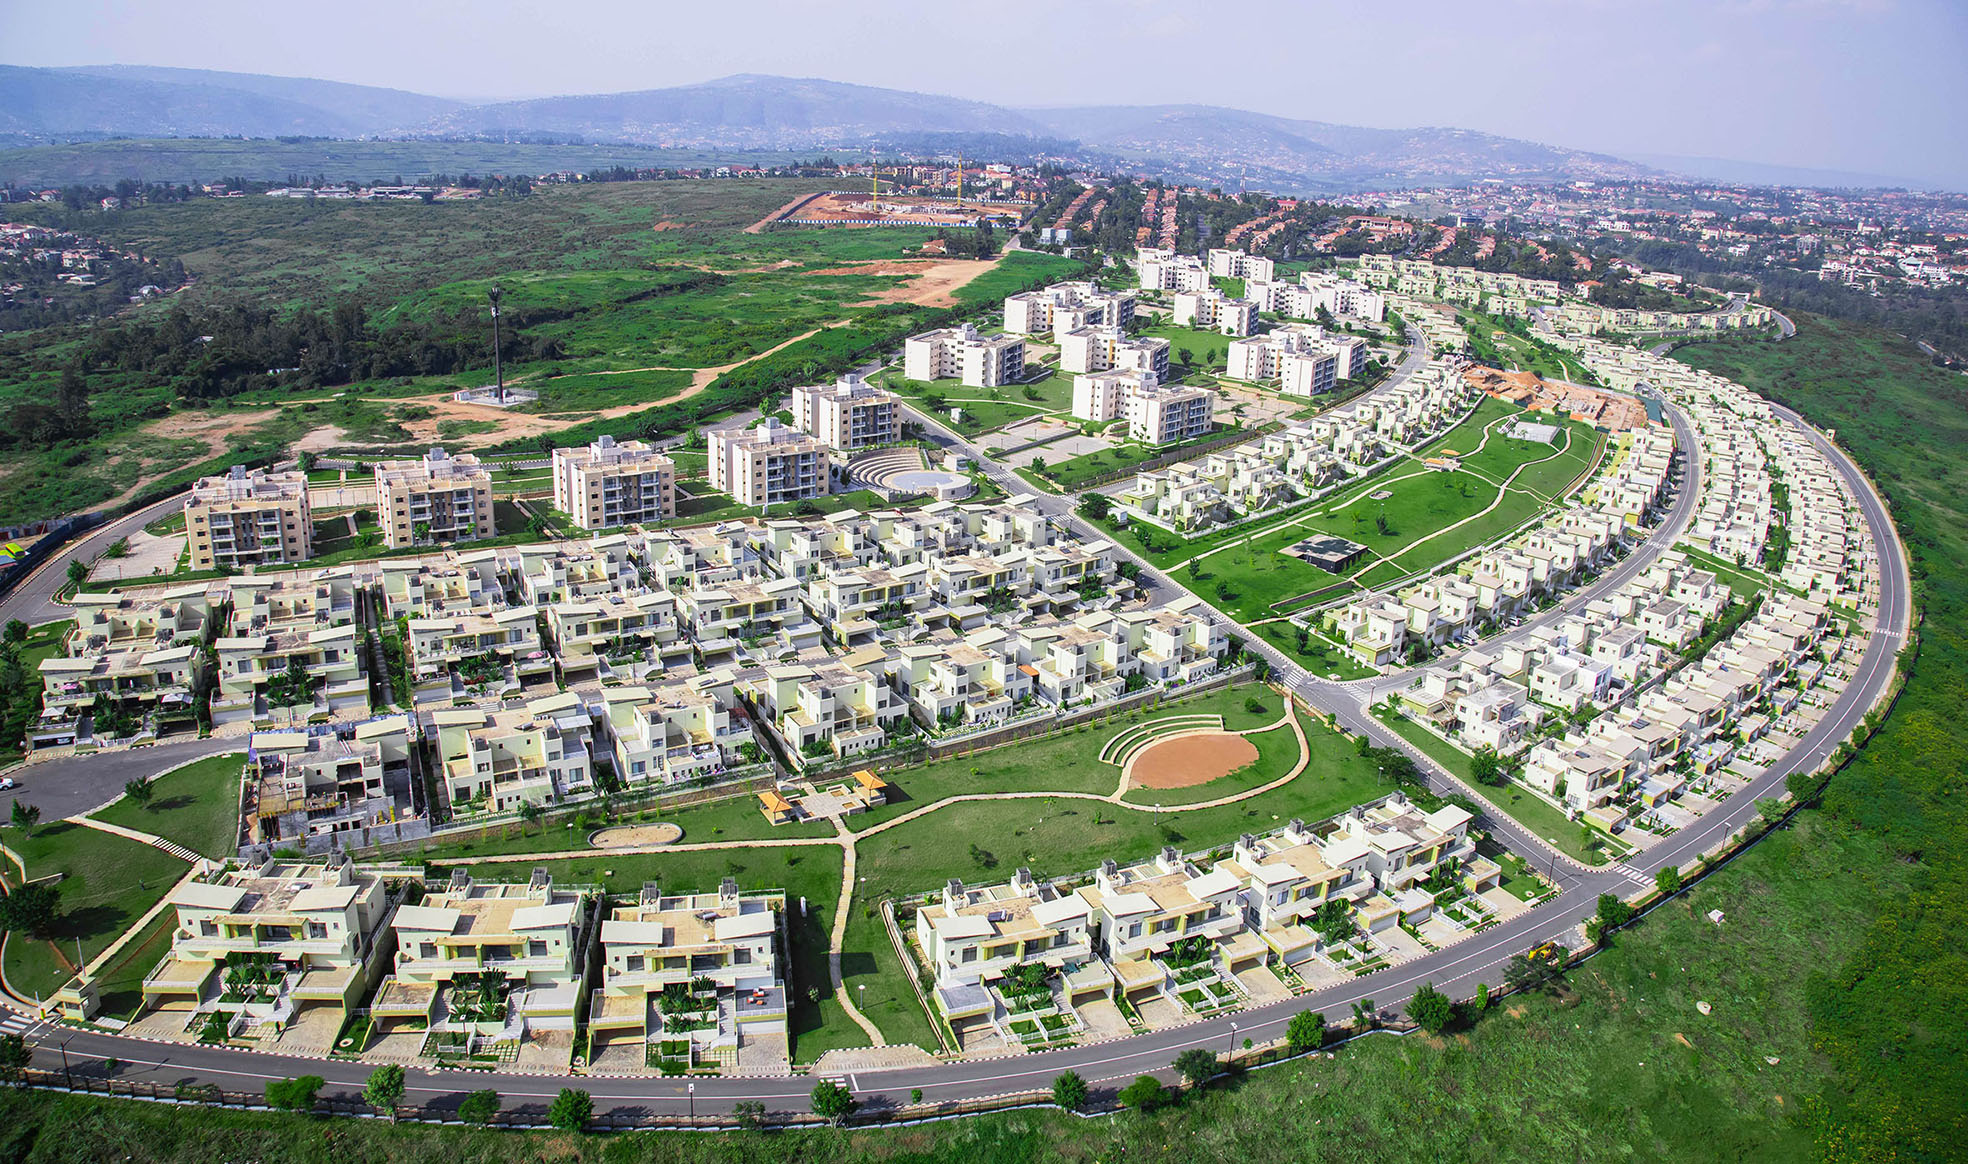 An aerial view of Vision City, an estate developed by Ultimate Developers Ltd. / Photo: File.